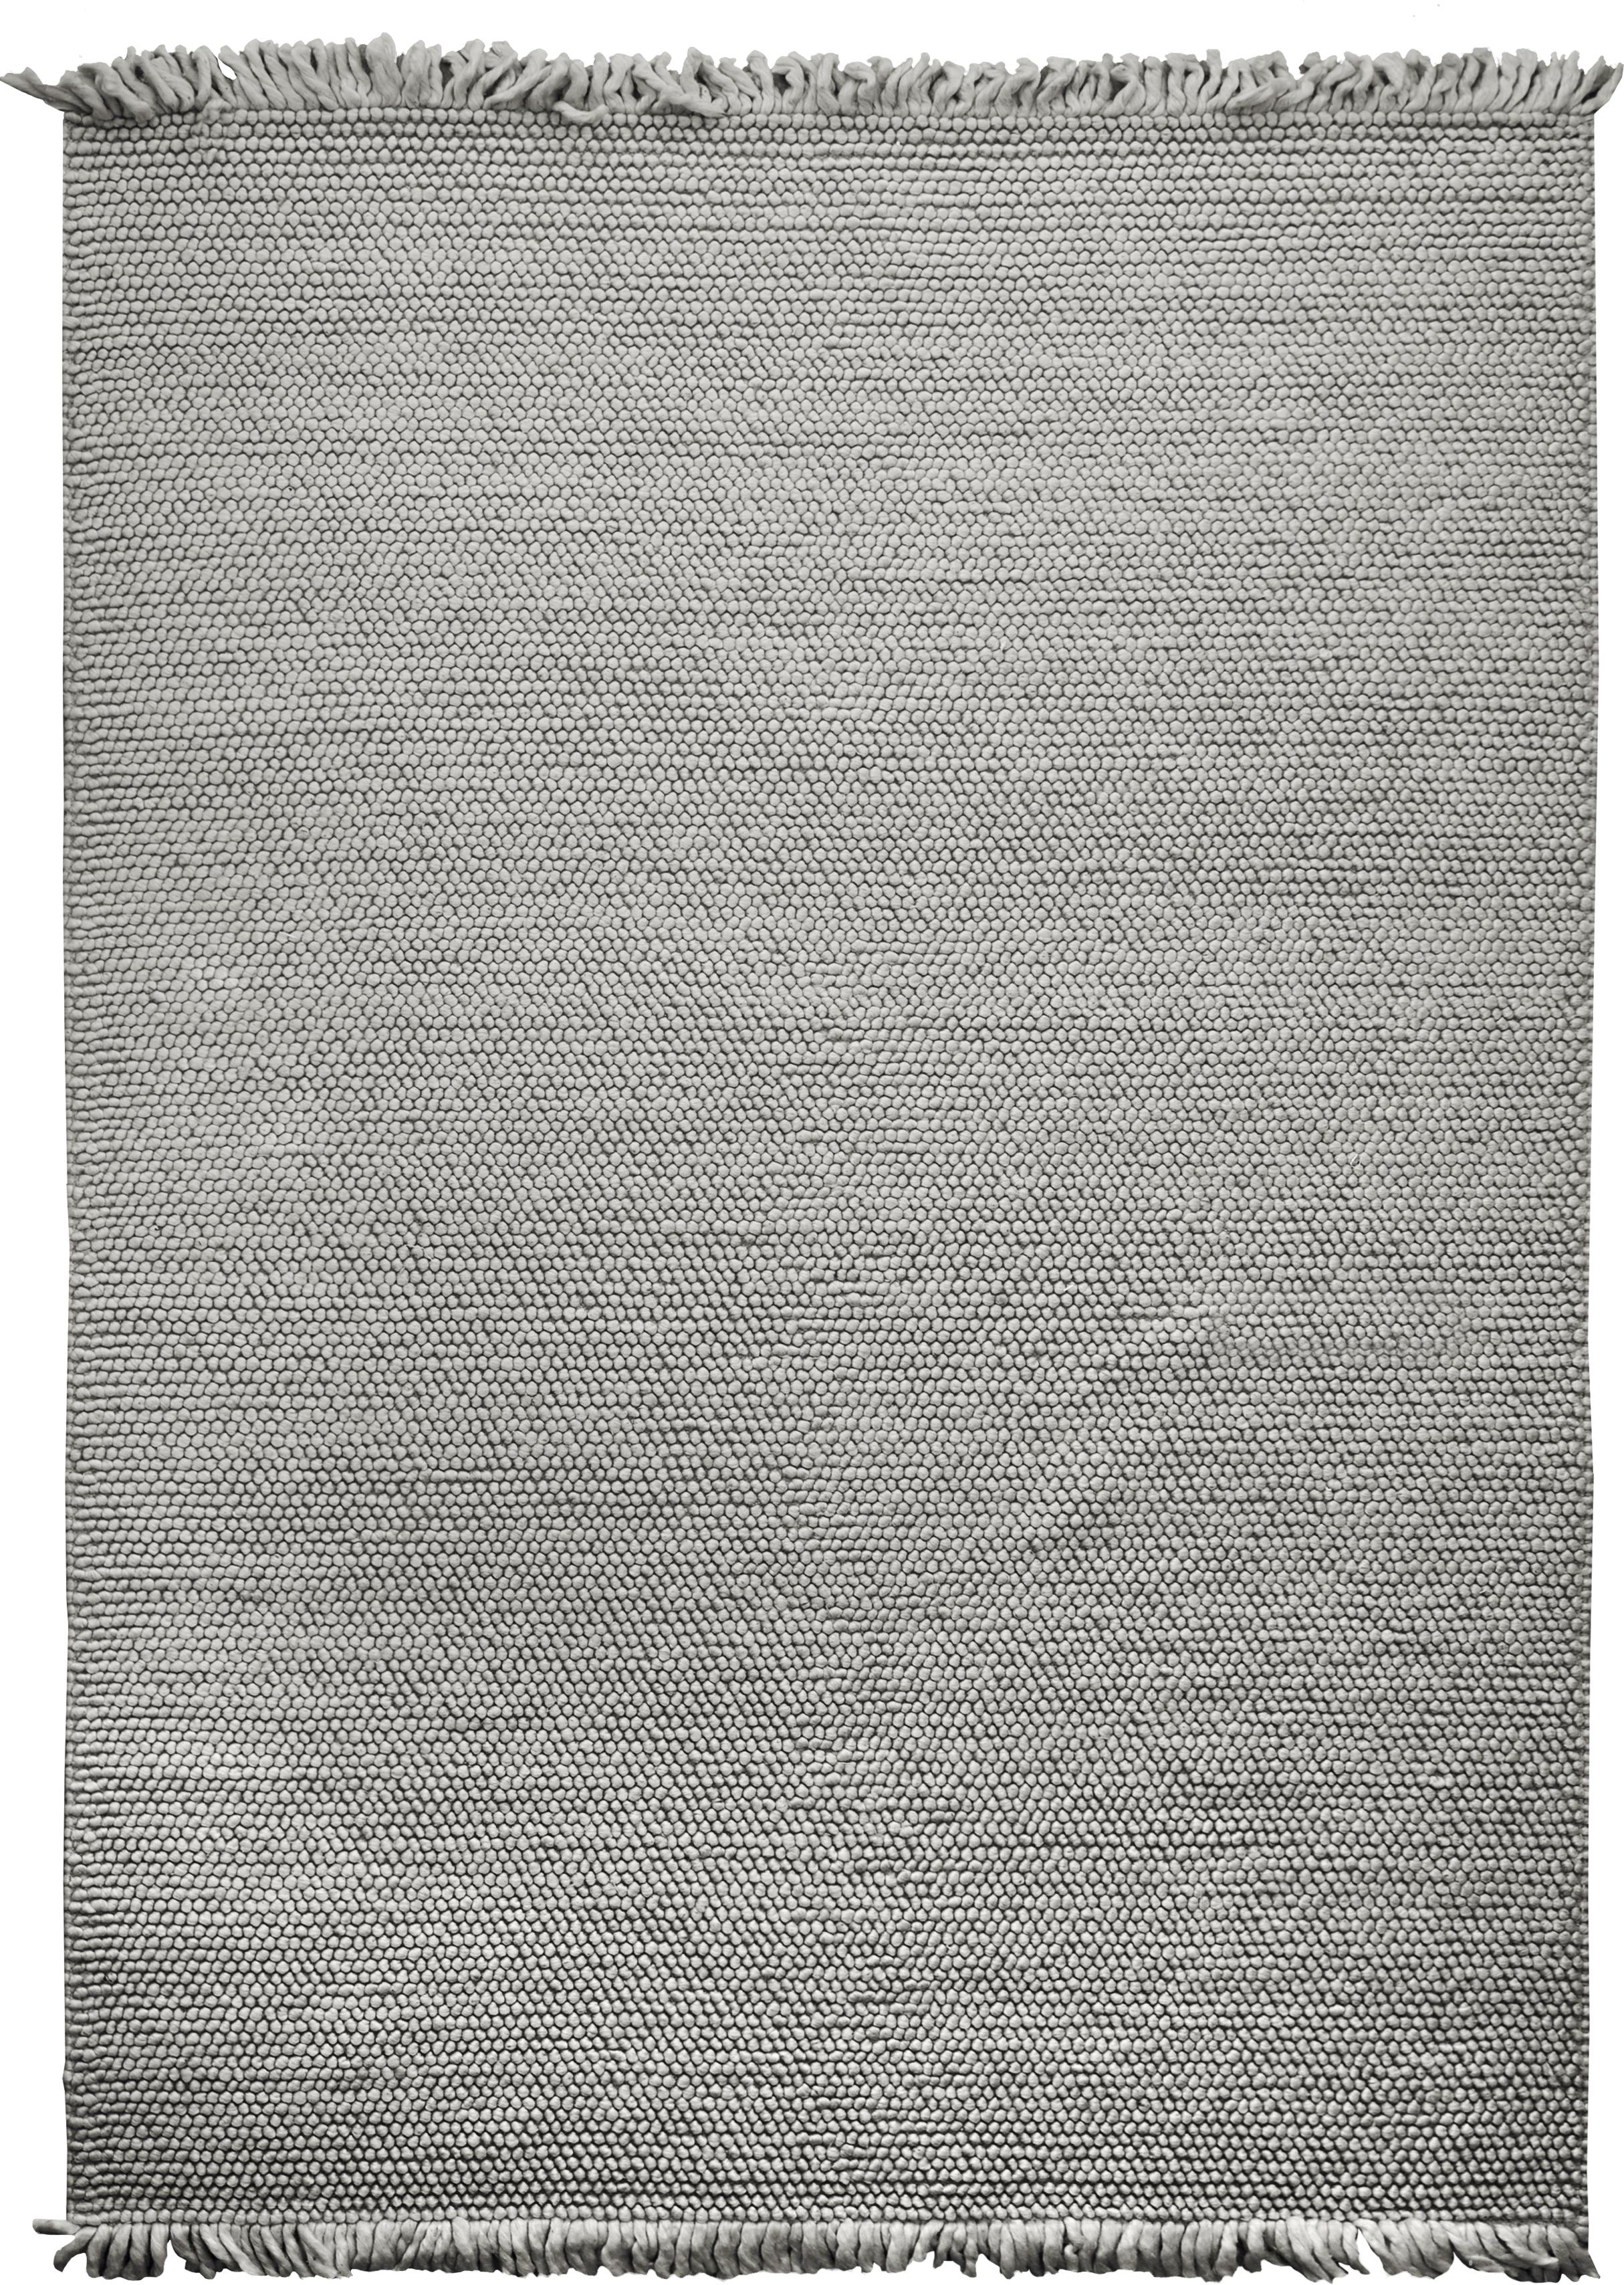 Indian Hand Loomed Super Soft Customizable Karma Rug in Smoke Large For Sale